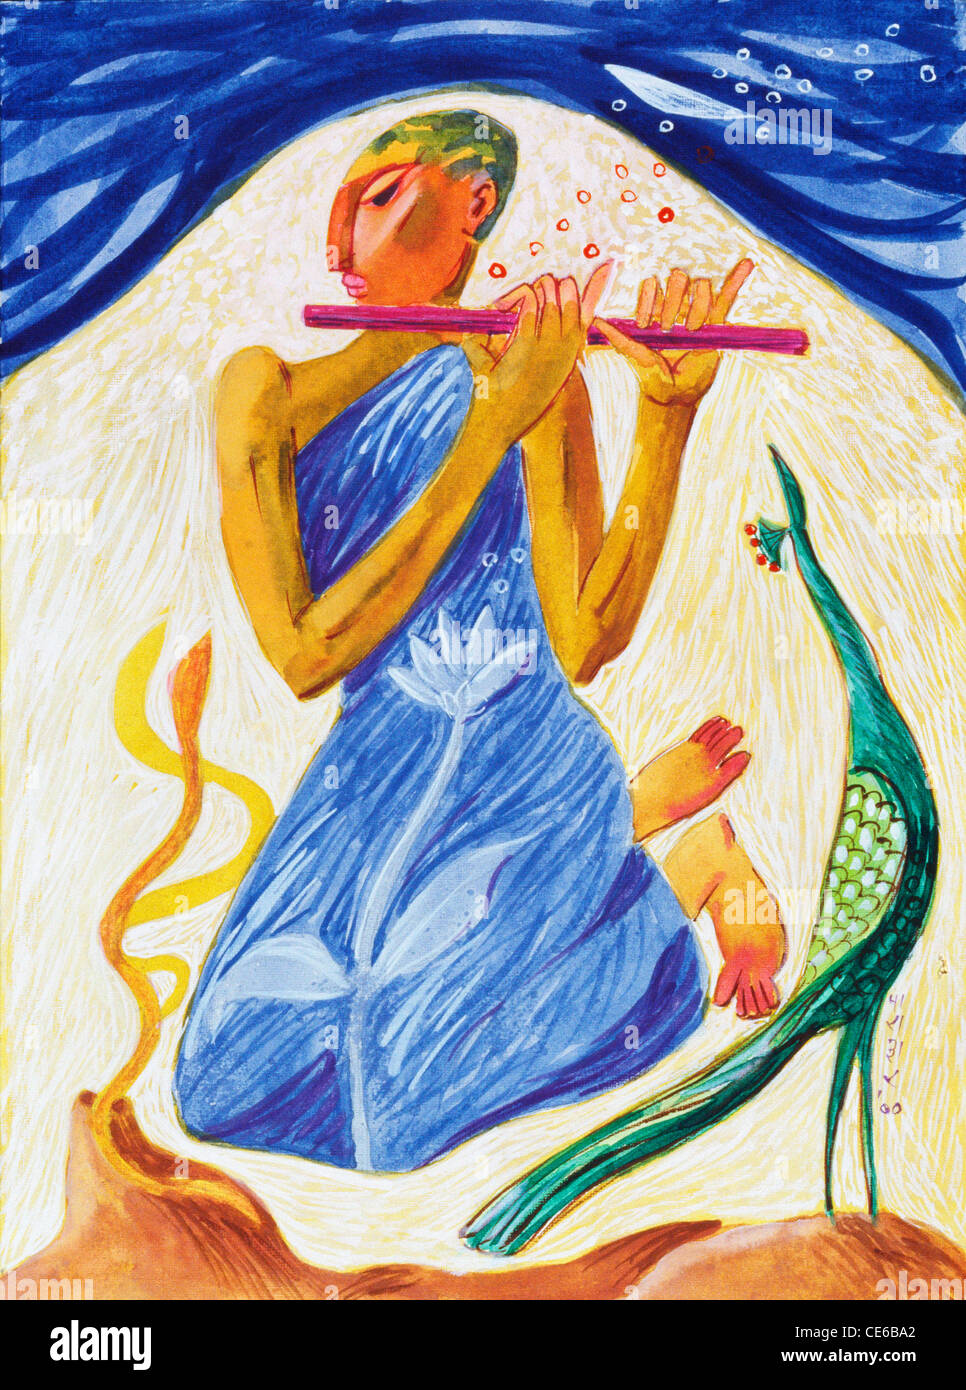 Man playing flute making birds and snakes dance ; watercolor ; painting ; watercolors ; paintings ; art ; artwork ; drawing ; sketch ; illustration ; Stock Photo